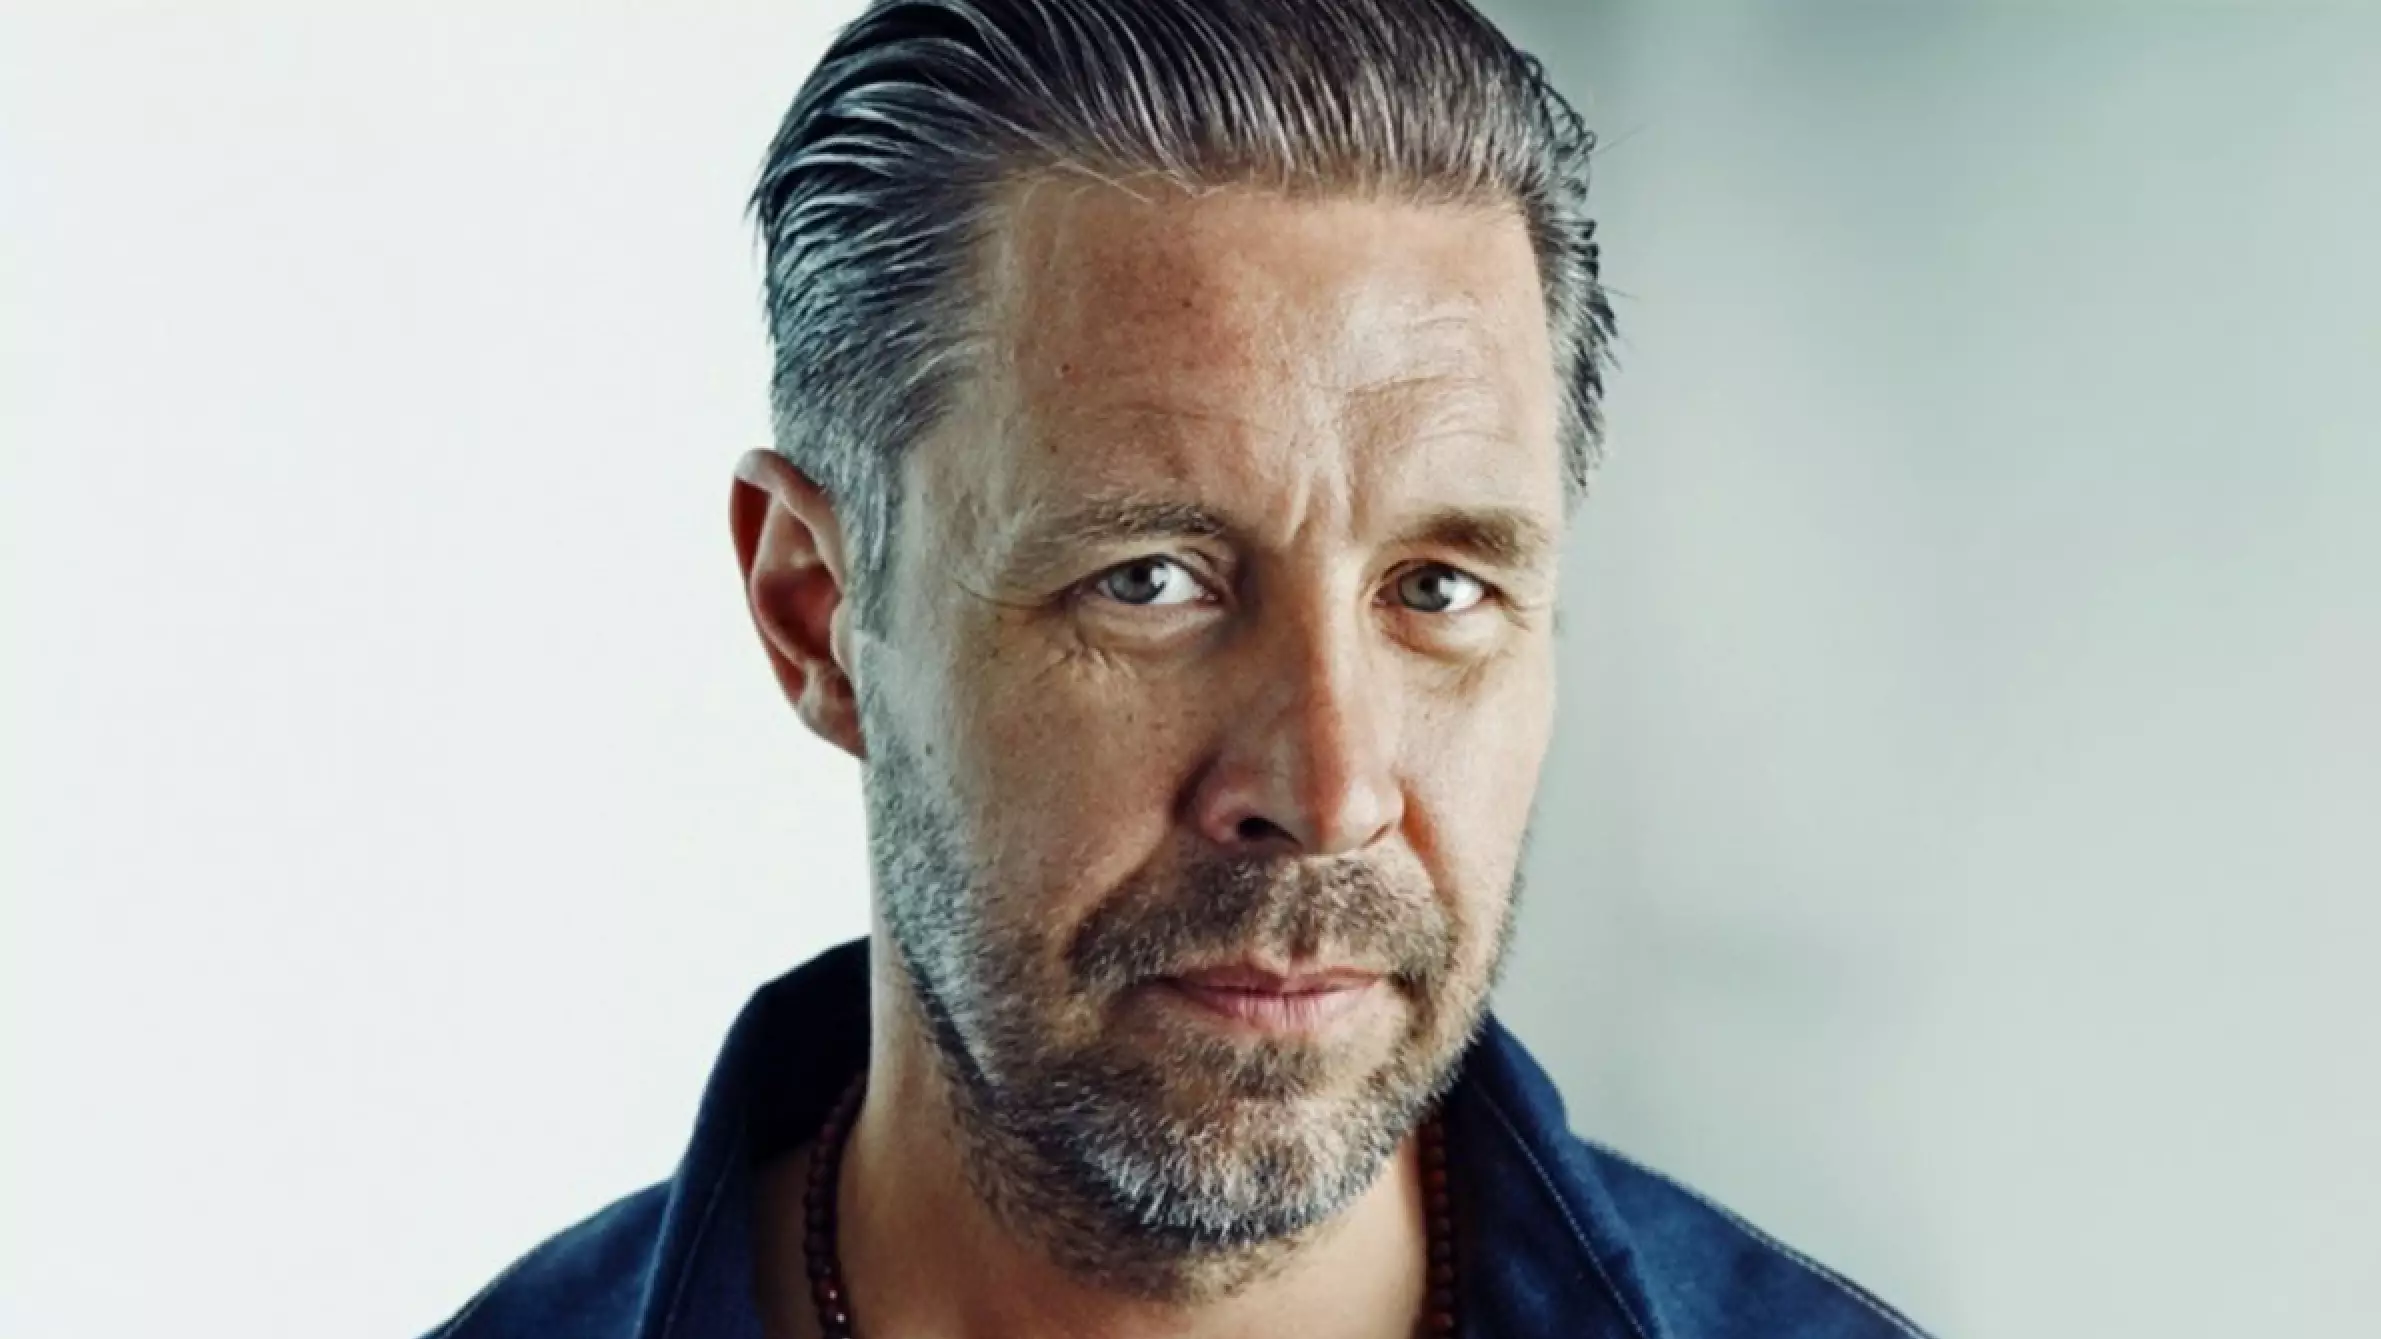 Paddy Considine Has Been Cast As King Viserys Targaryen In Game Of Thrones Prequel